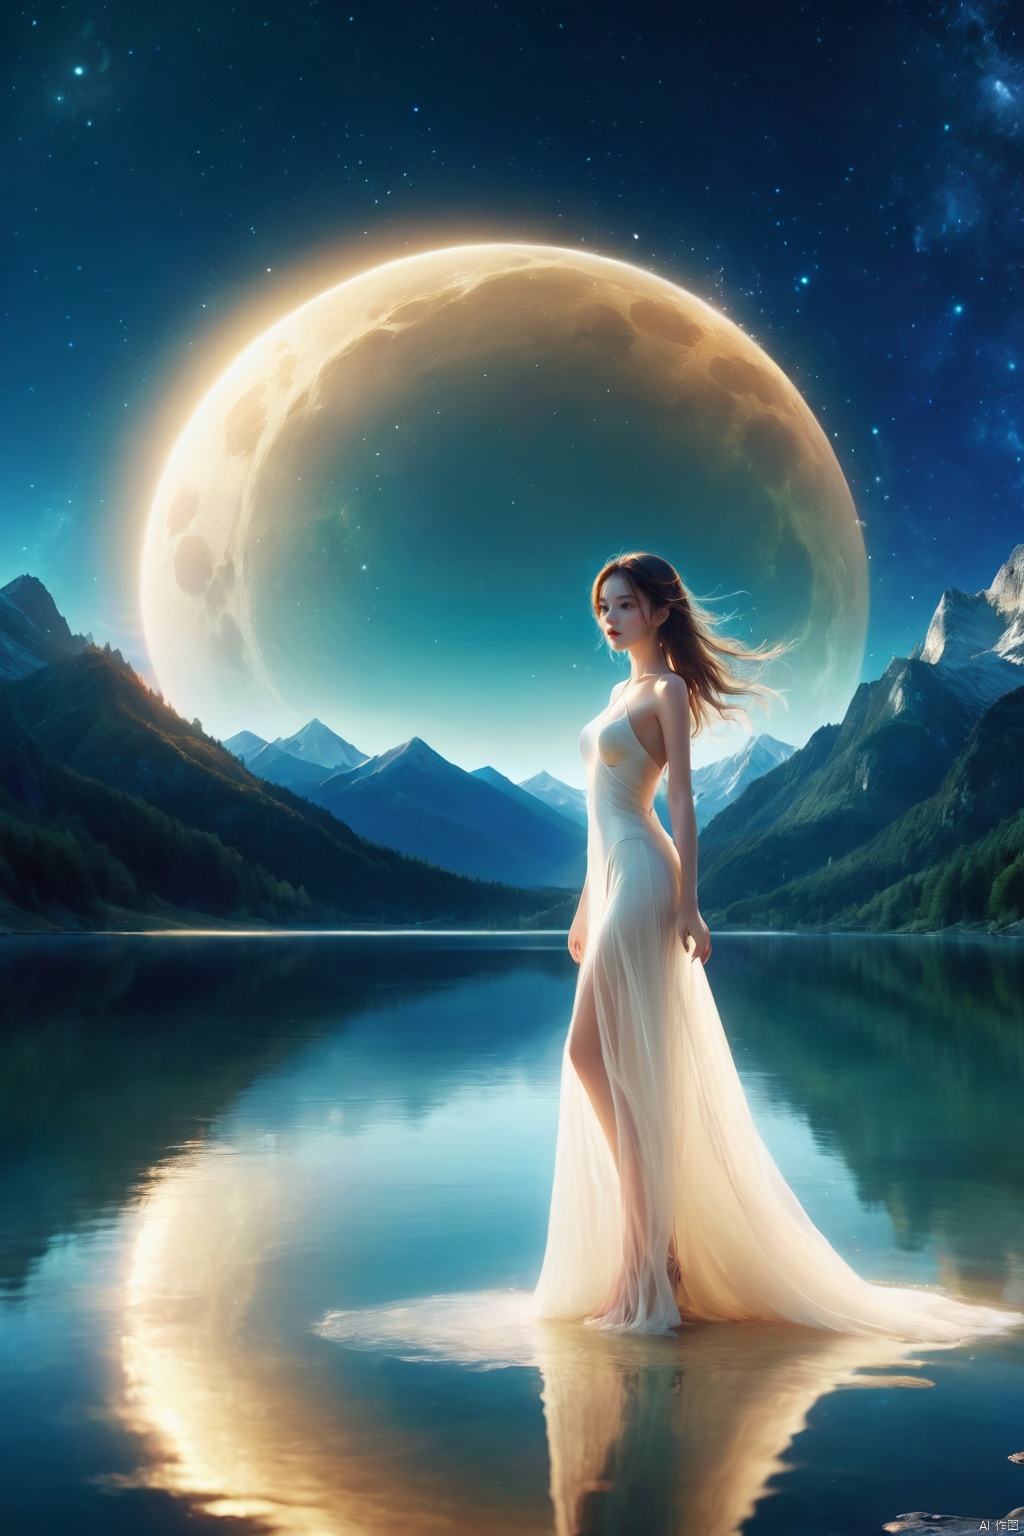  Super fantasy special effects,1 girl standing on the lake, facing the audience, full body, bare legs, white dress, night, mountain, full moon, foreground, jjmx